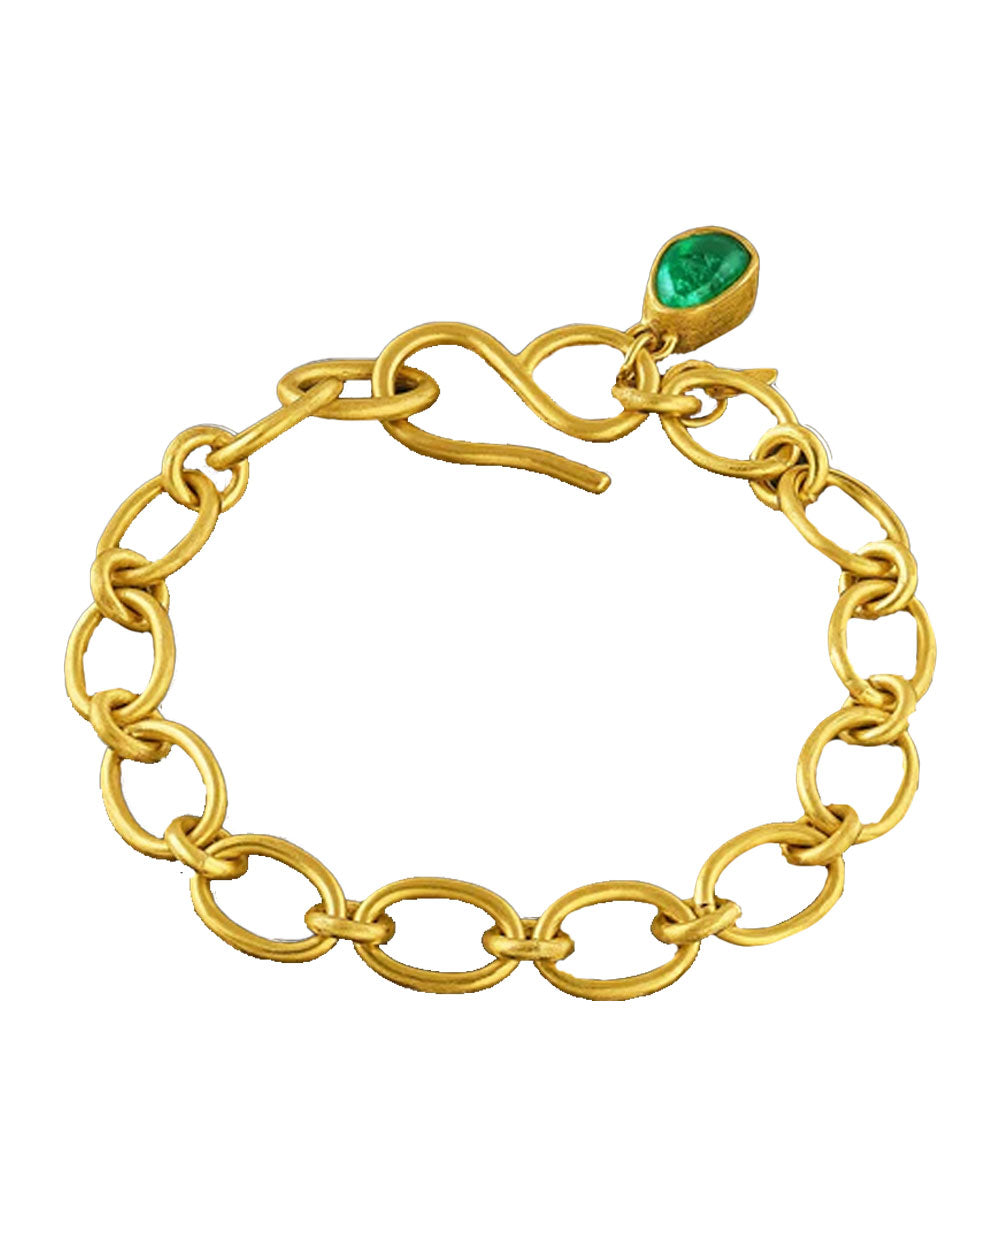 Cable Chain Bracelet with Muzo Emerald Charm